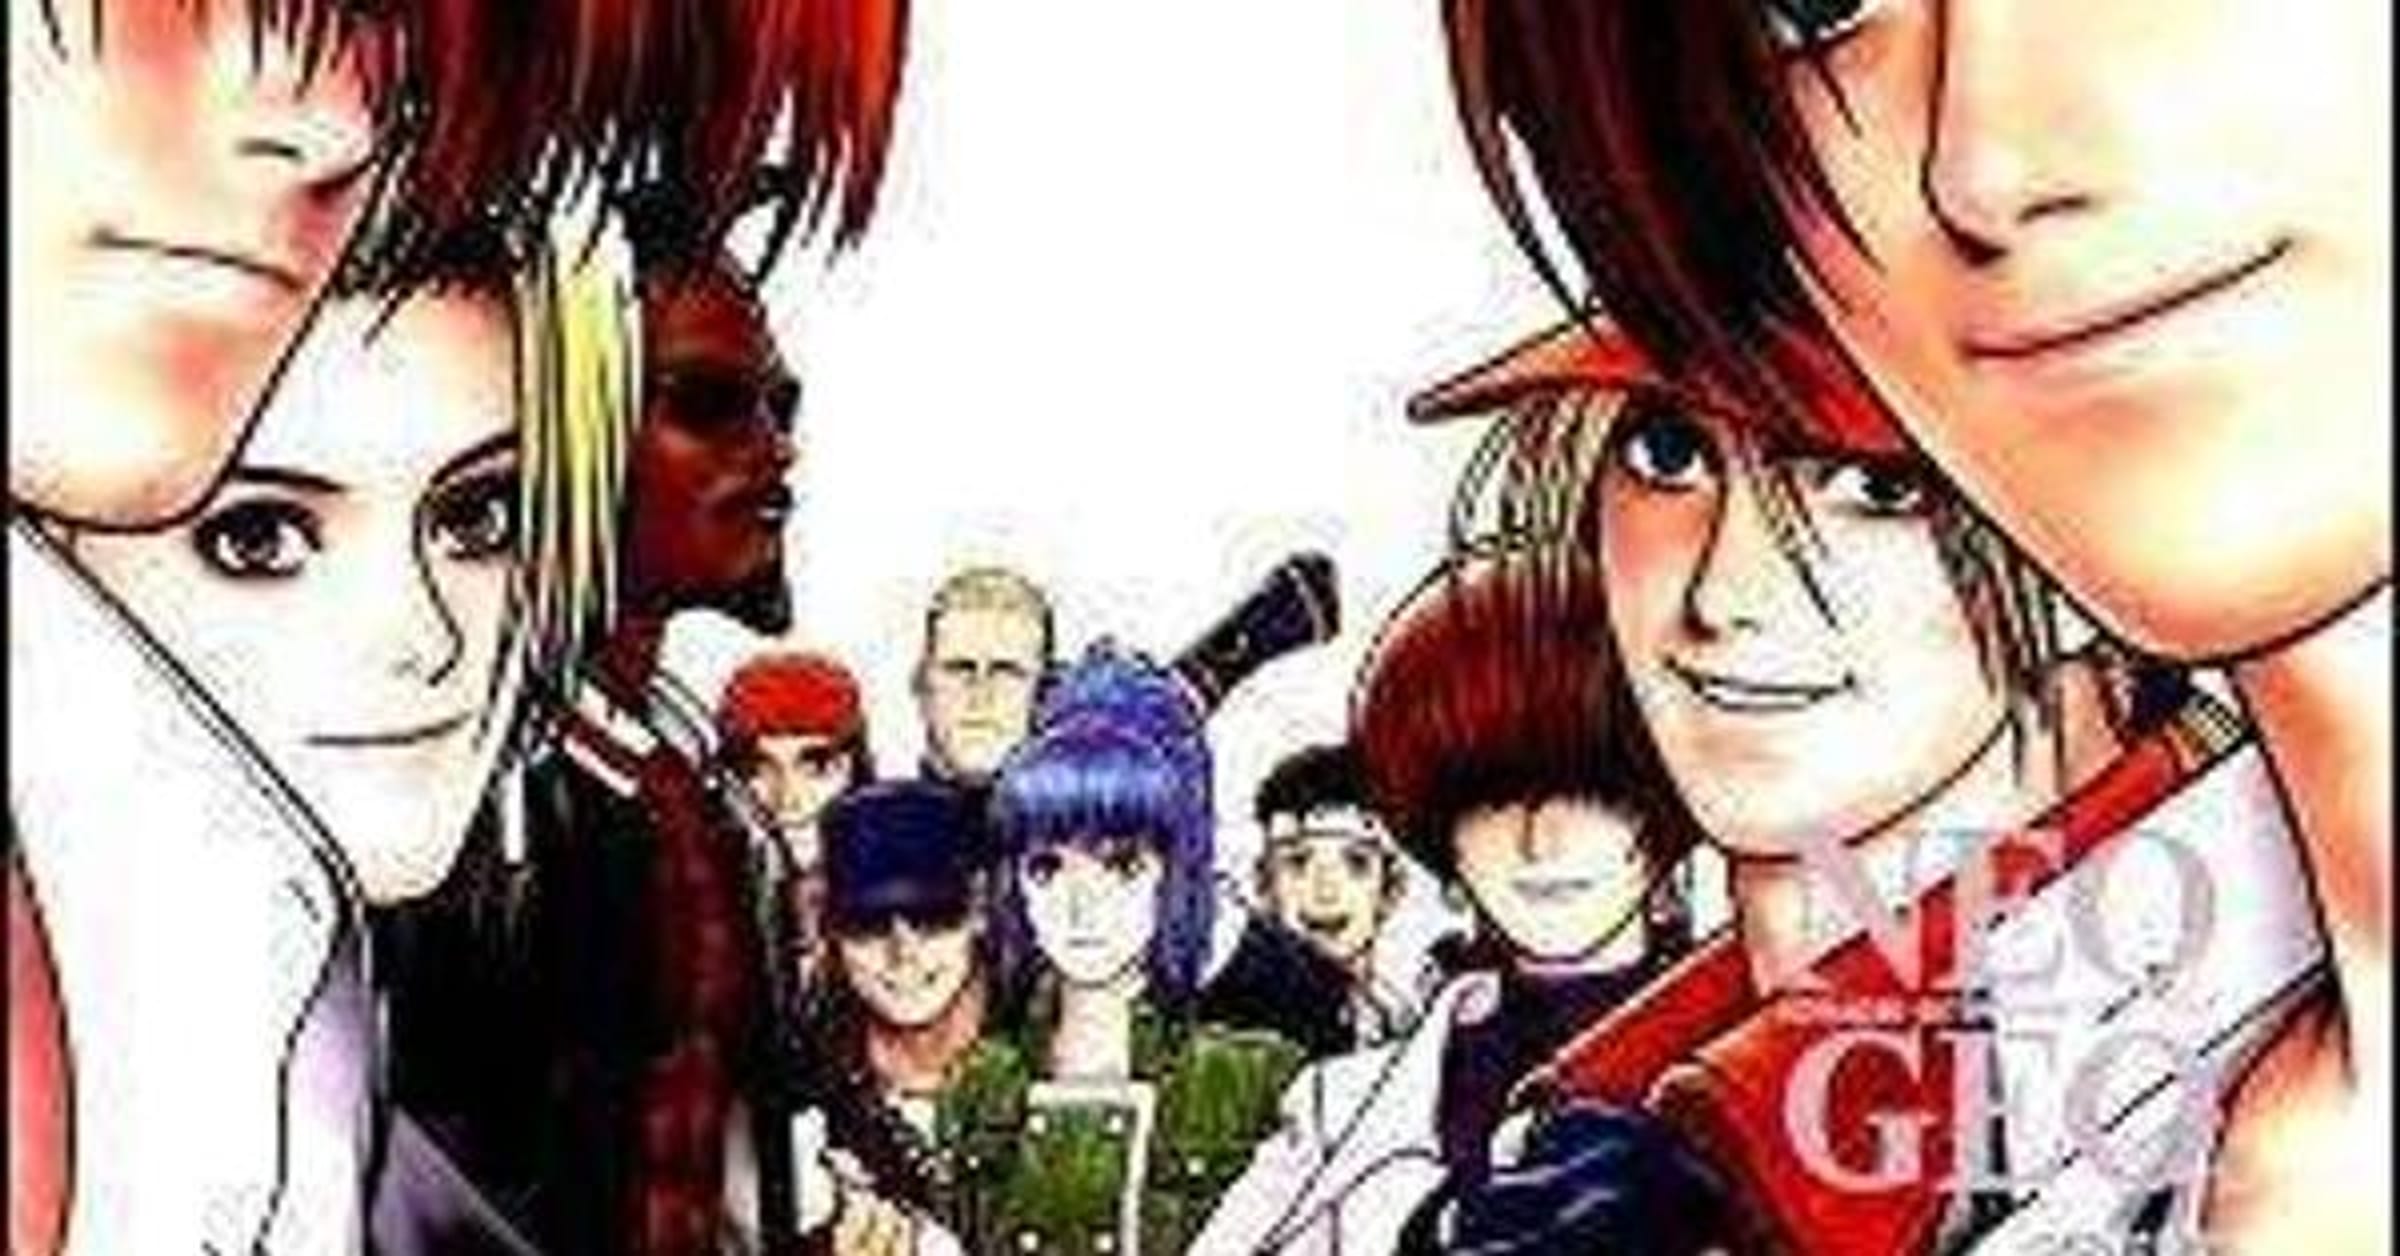 Get ready to rumble as SNK Playmore brings The King of Fighters